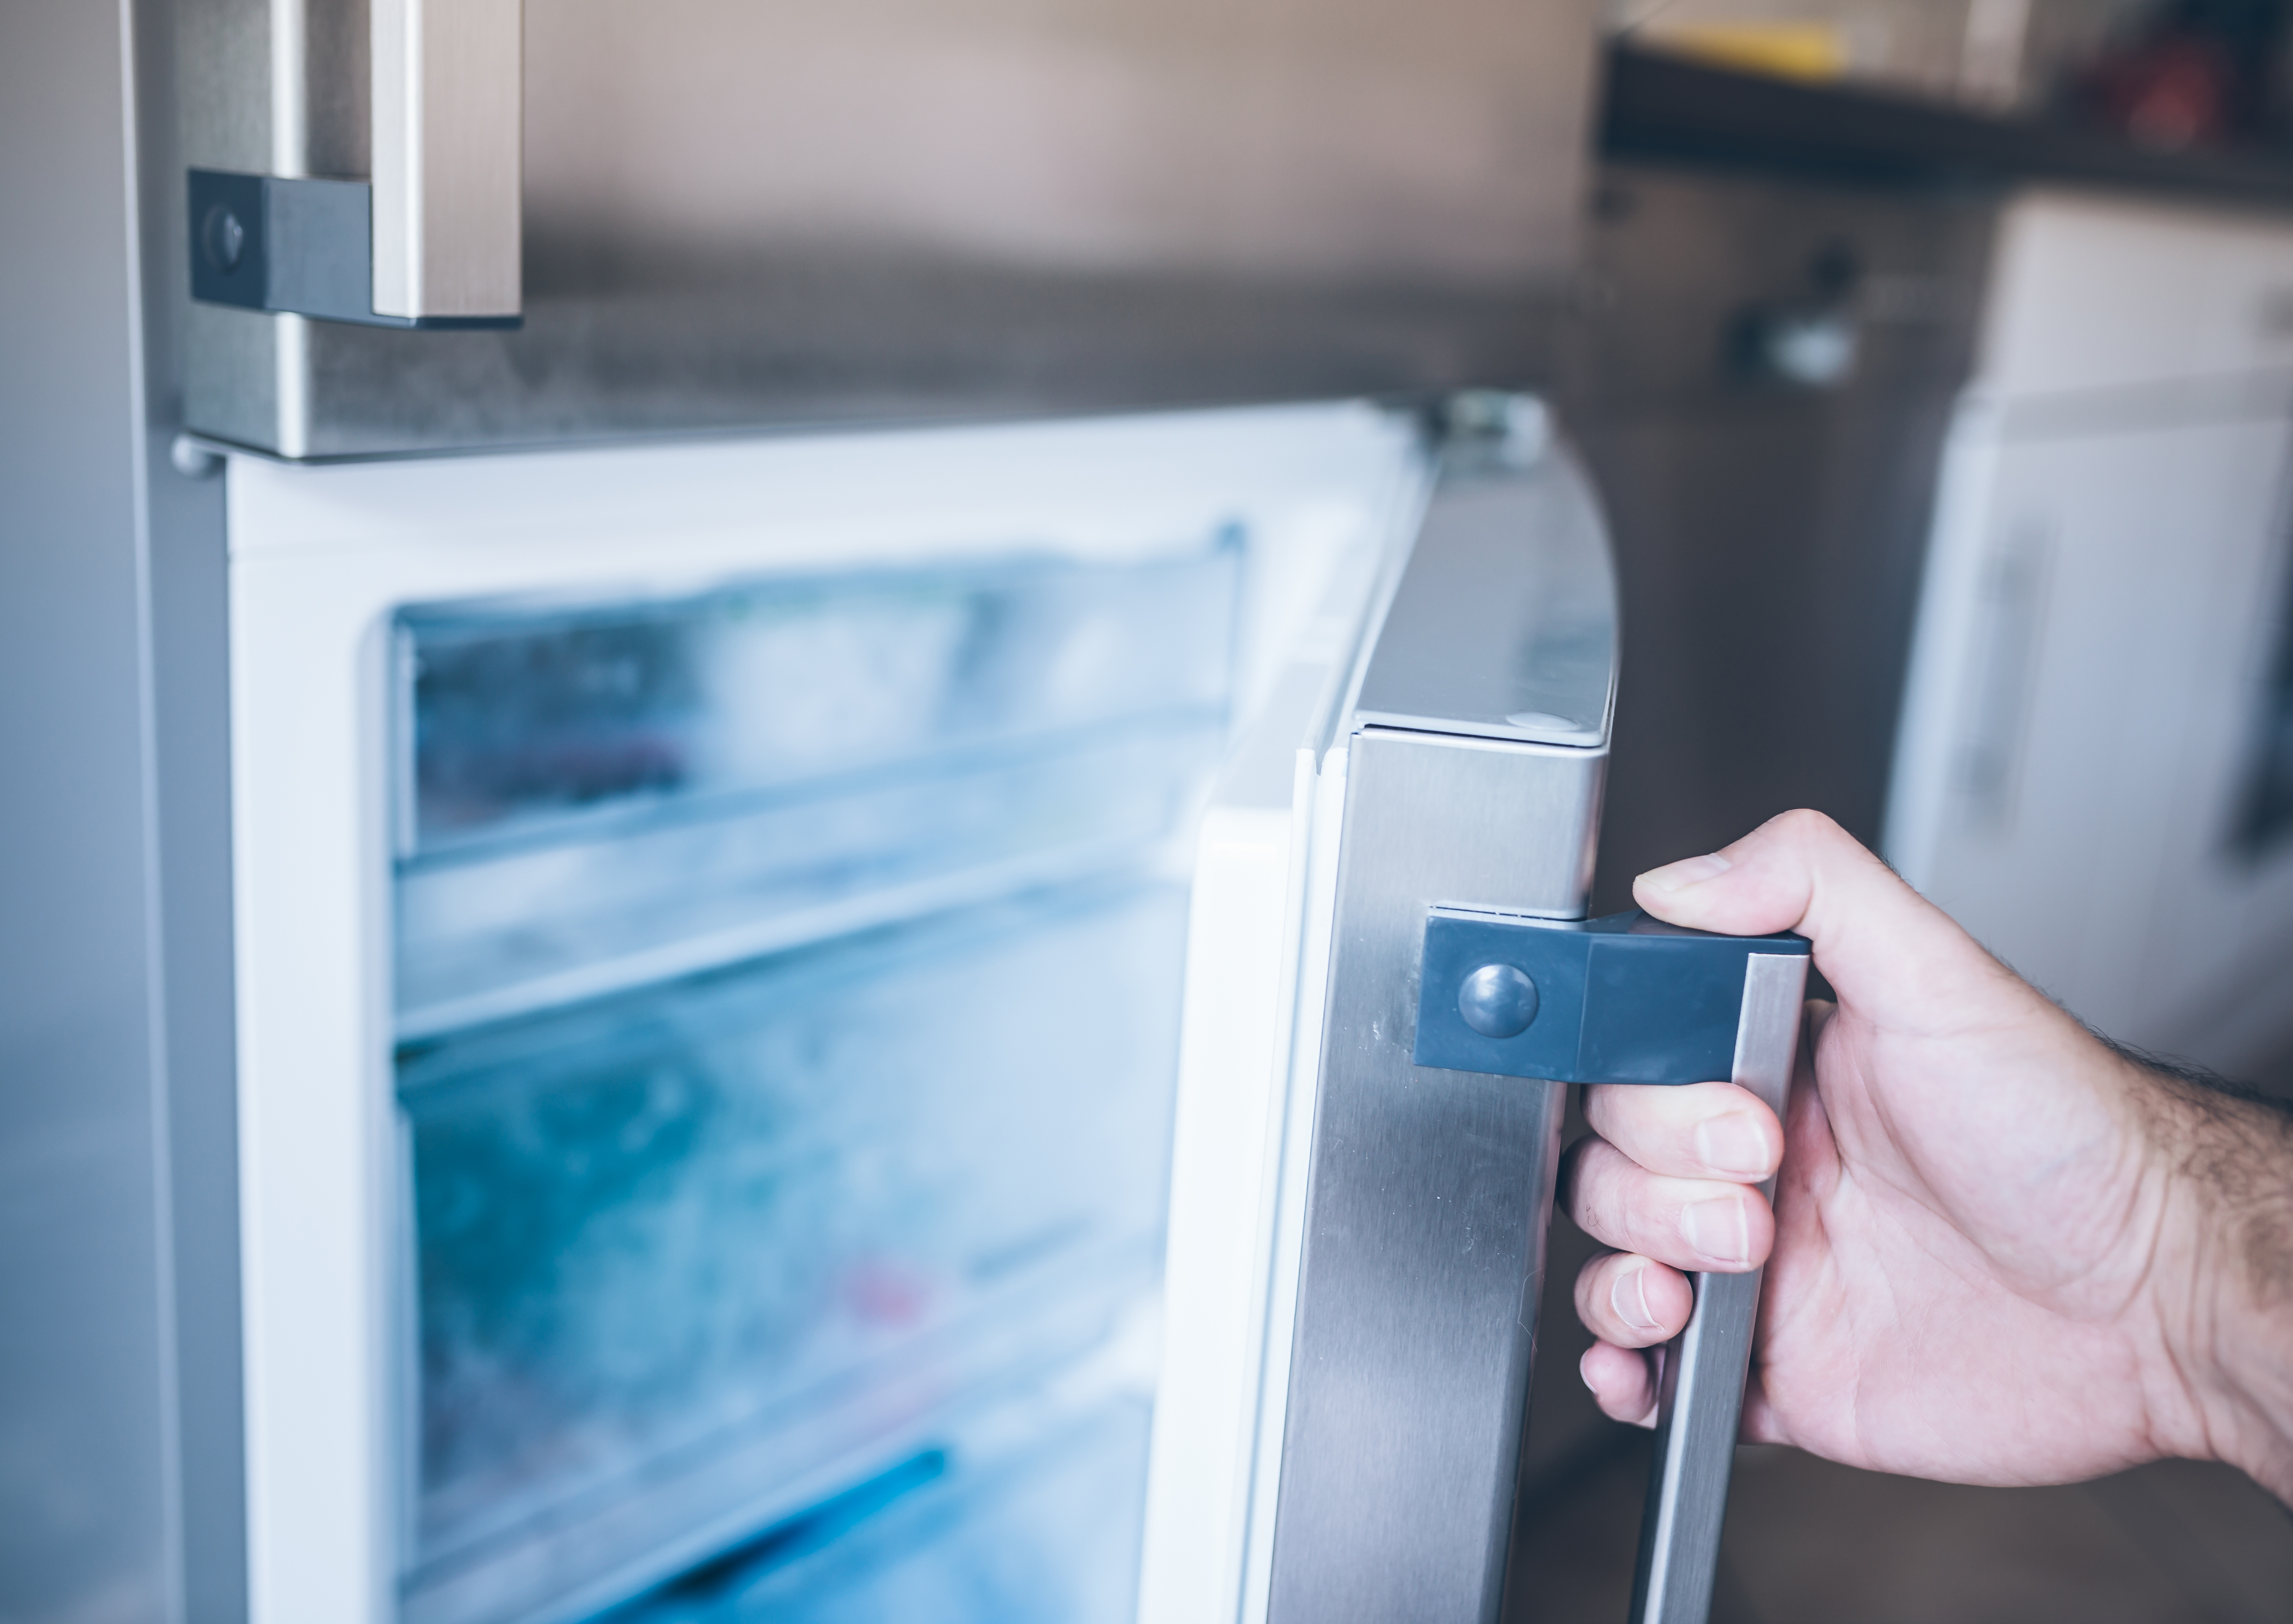 How Does a Freezer Work?